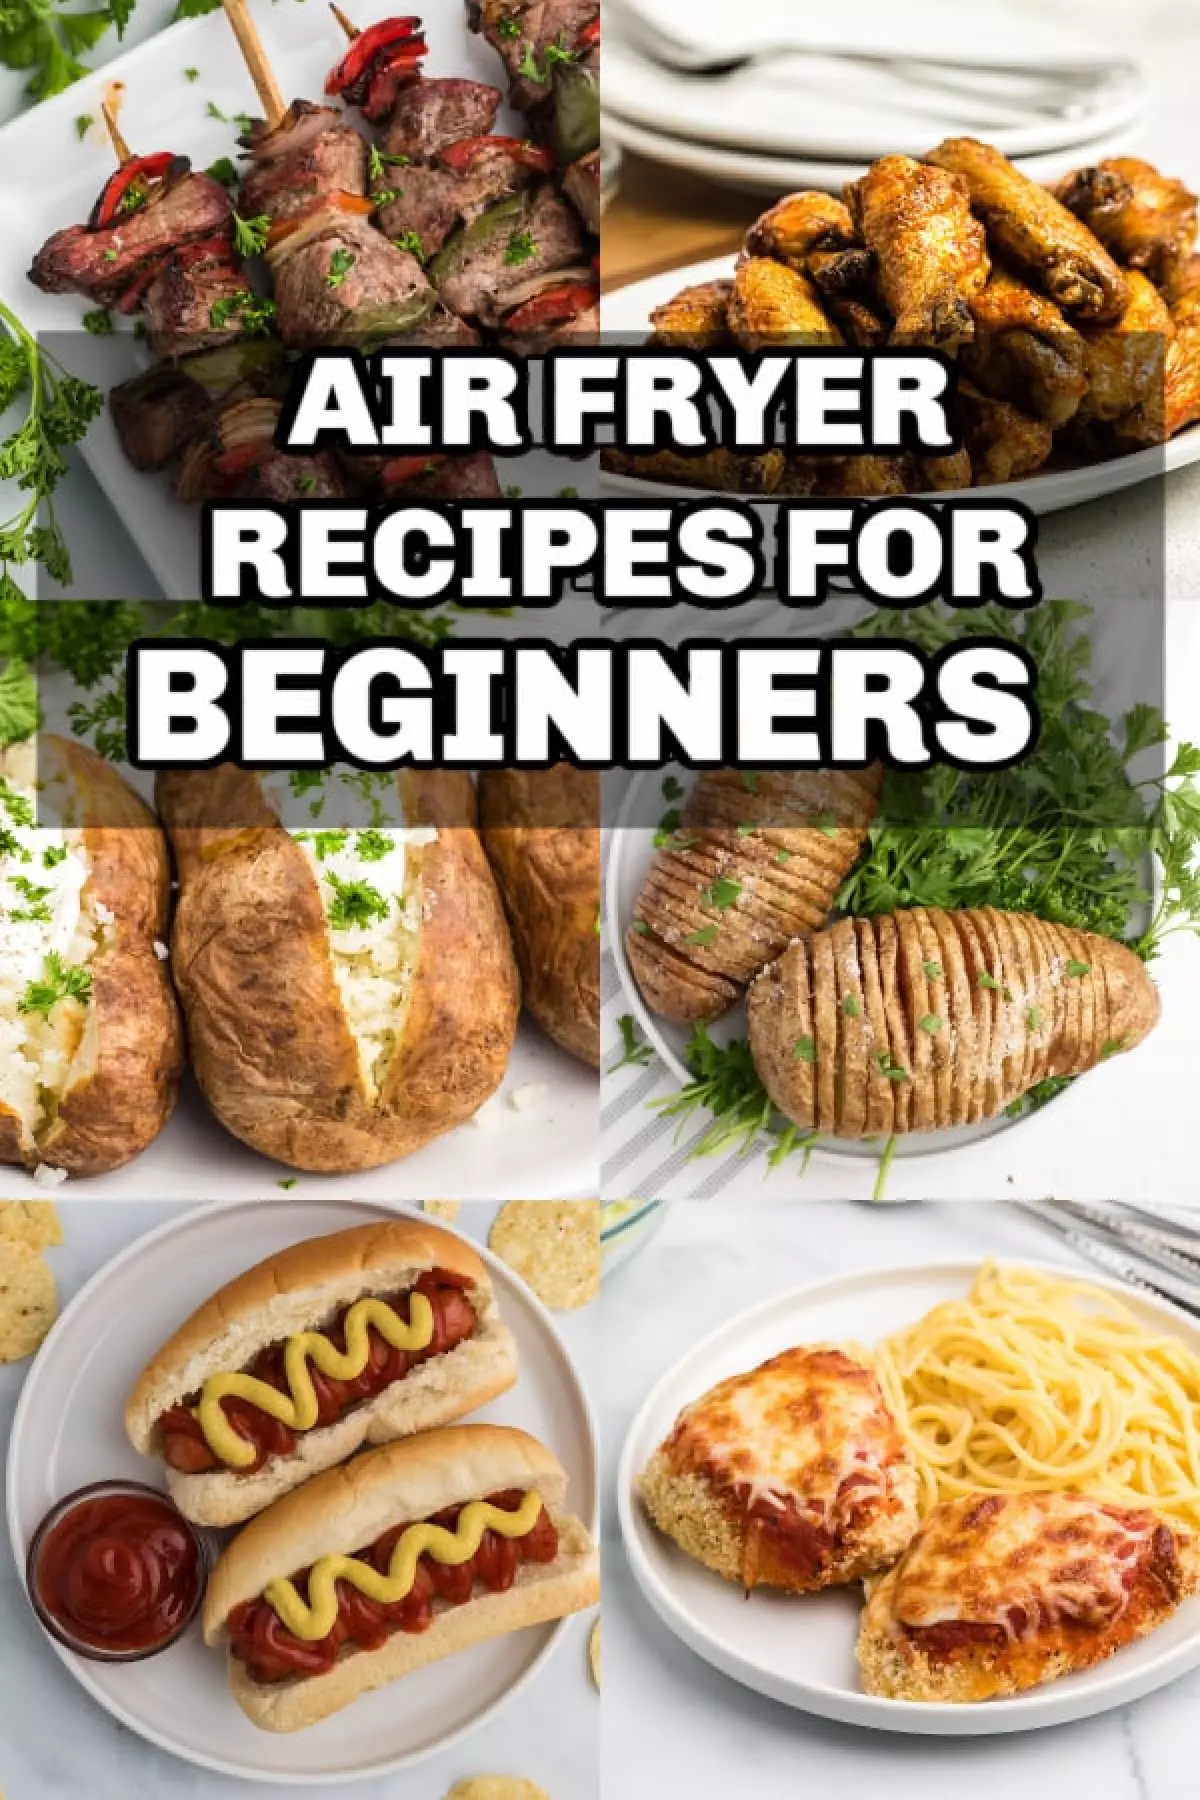 COLLAGE OF PHOTOS FOR AIR FRYER RECIPES FOR BEGINNERS.